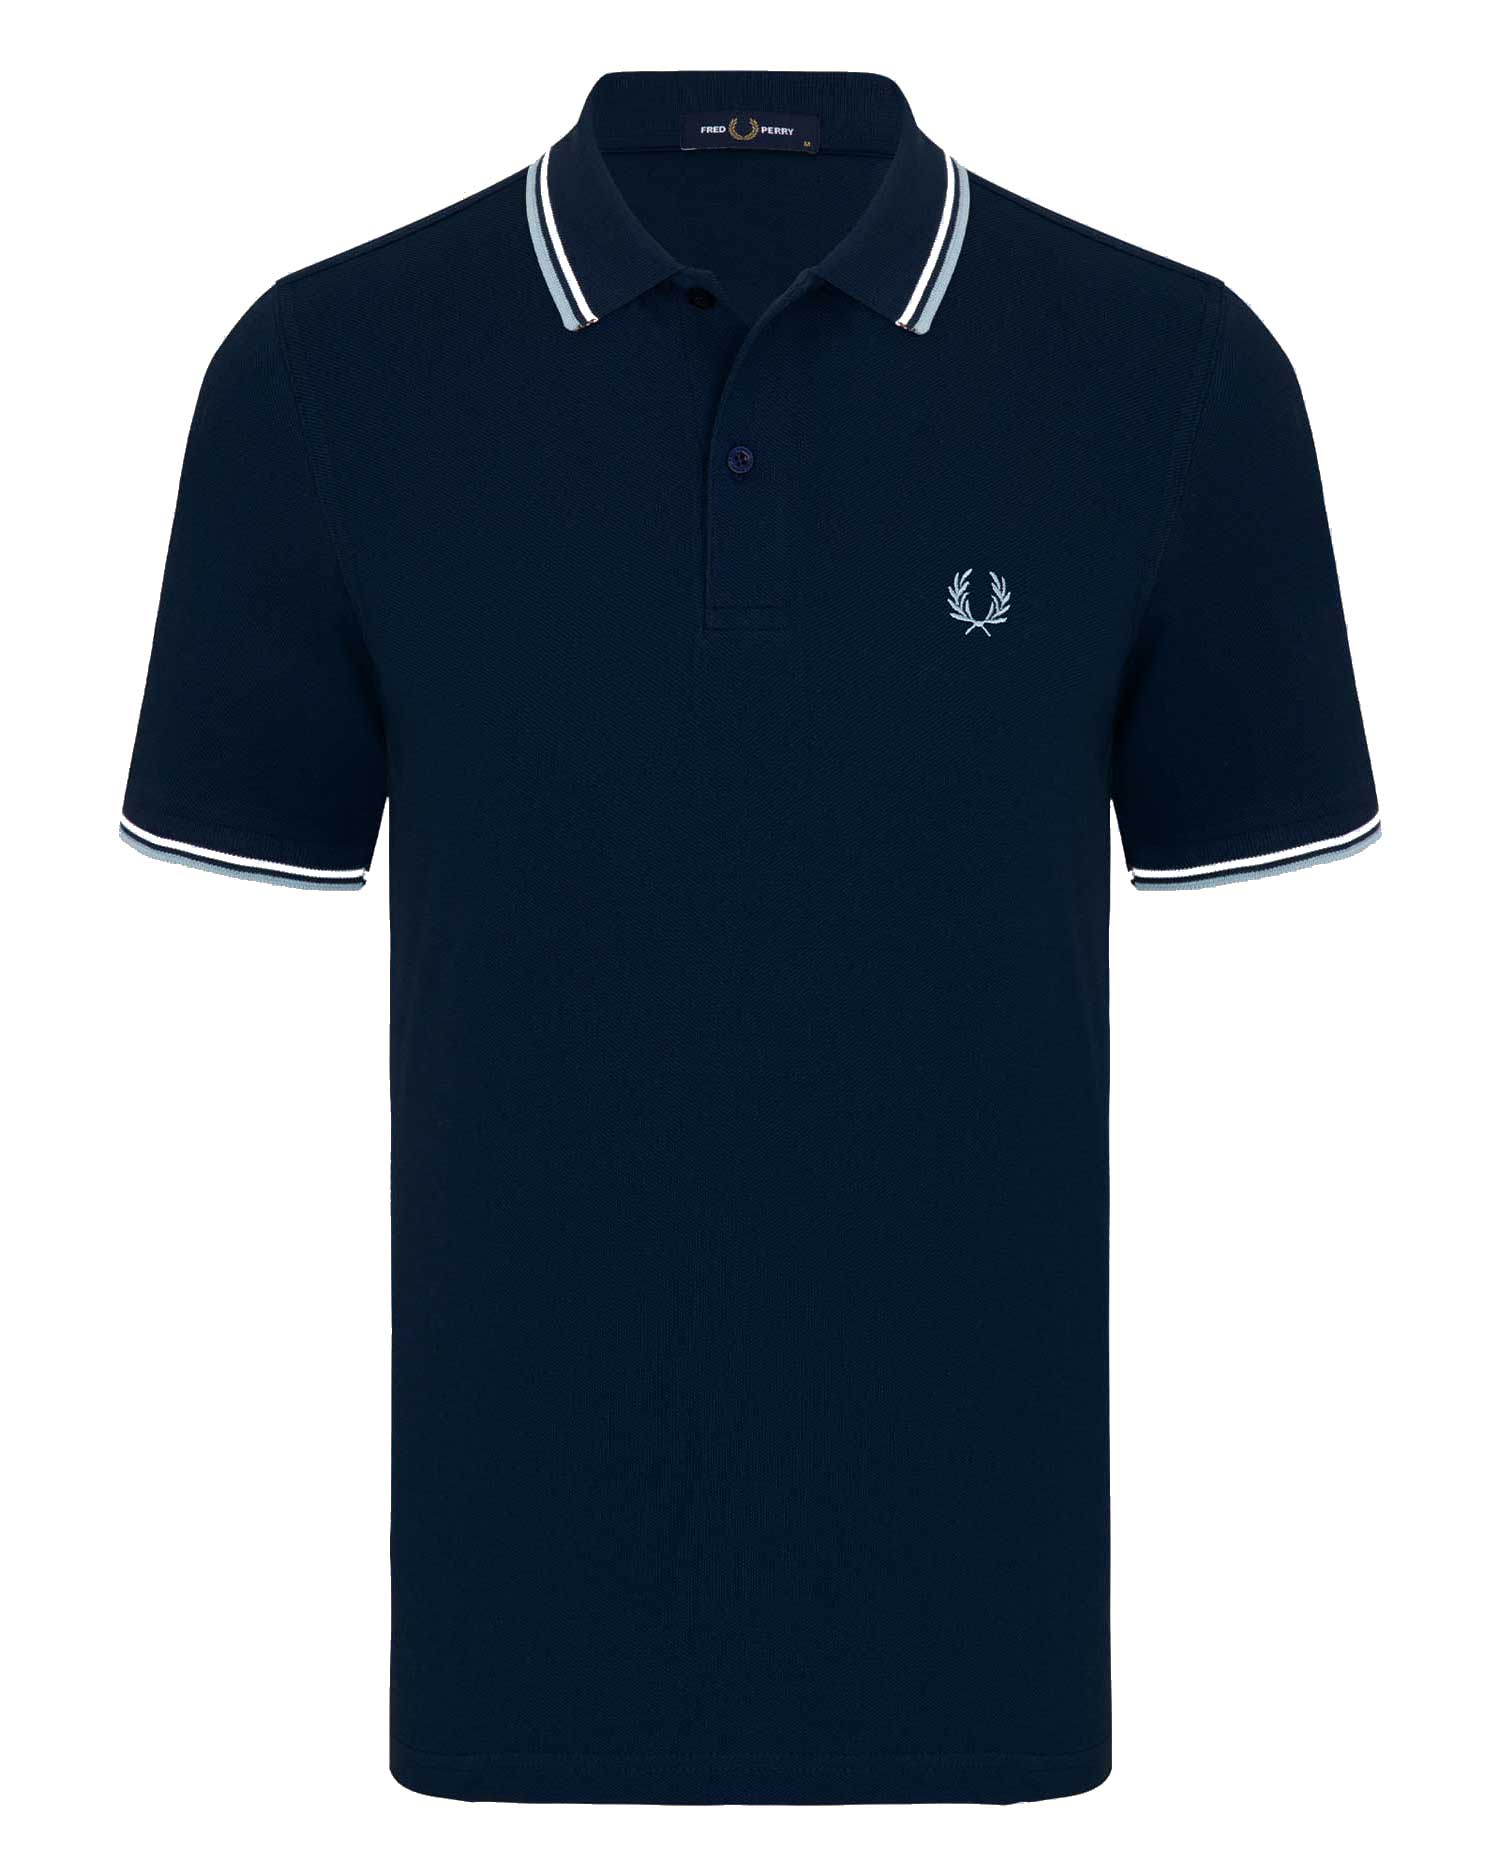 POLO FRED PERRY - NAVY/CIEL